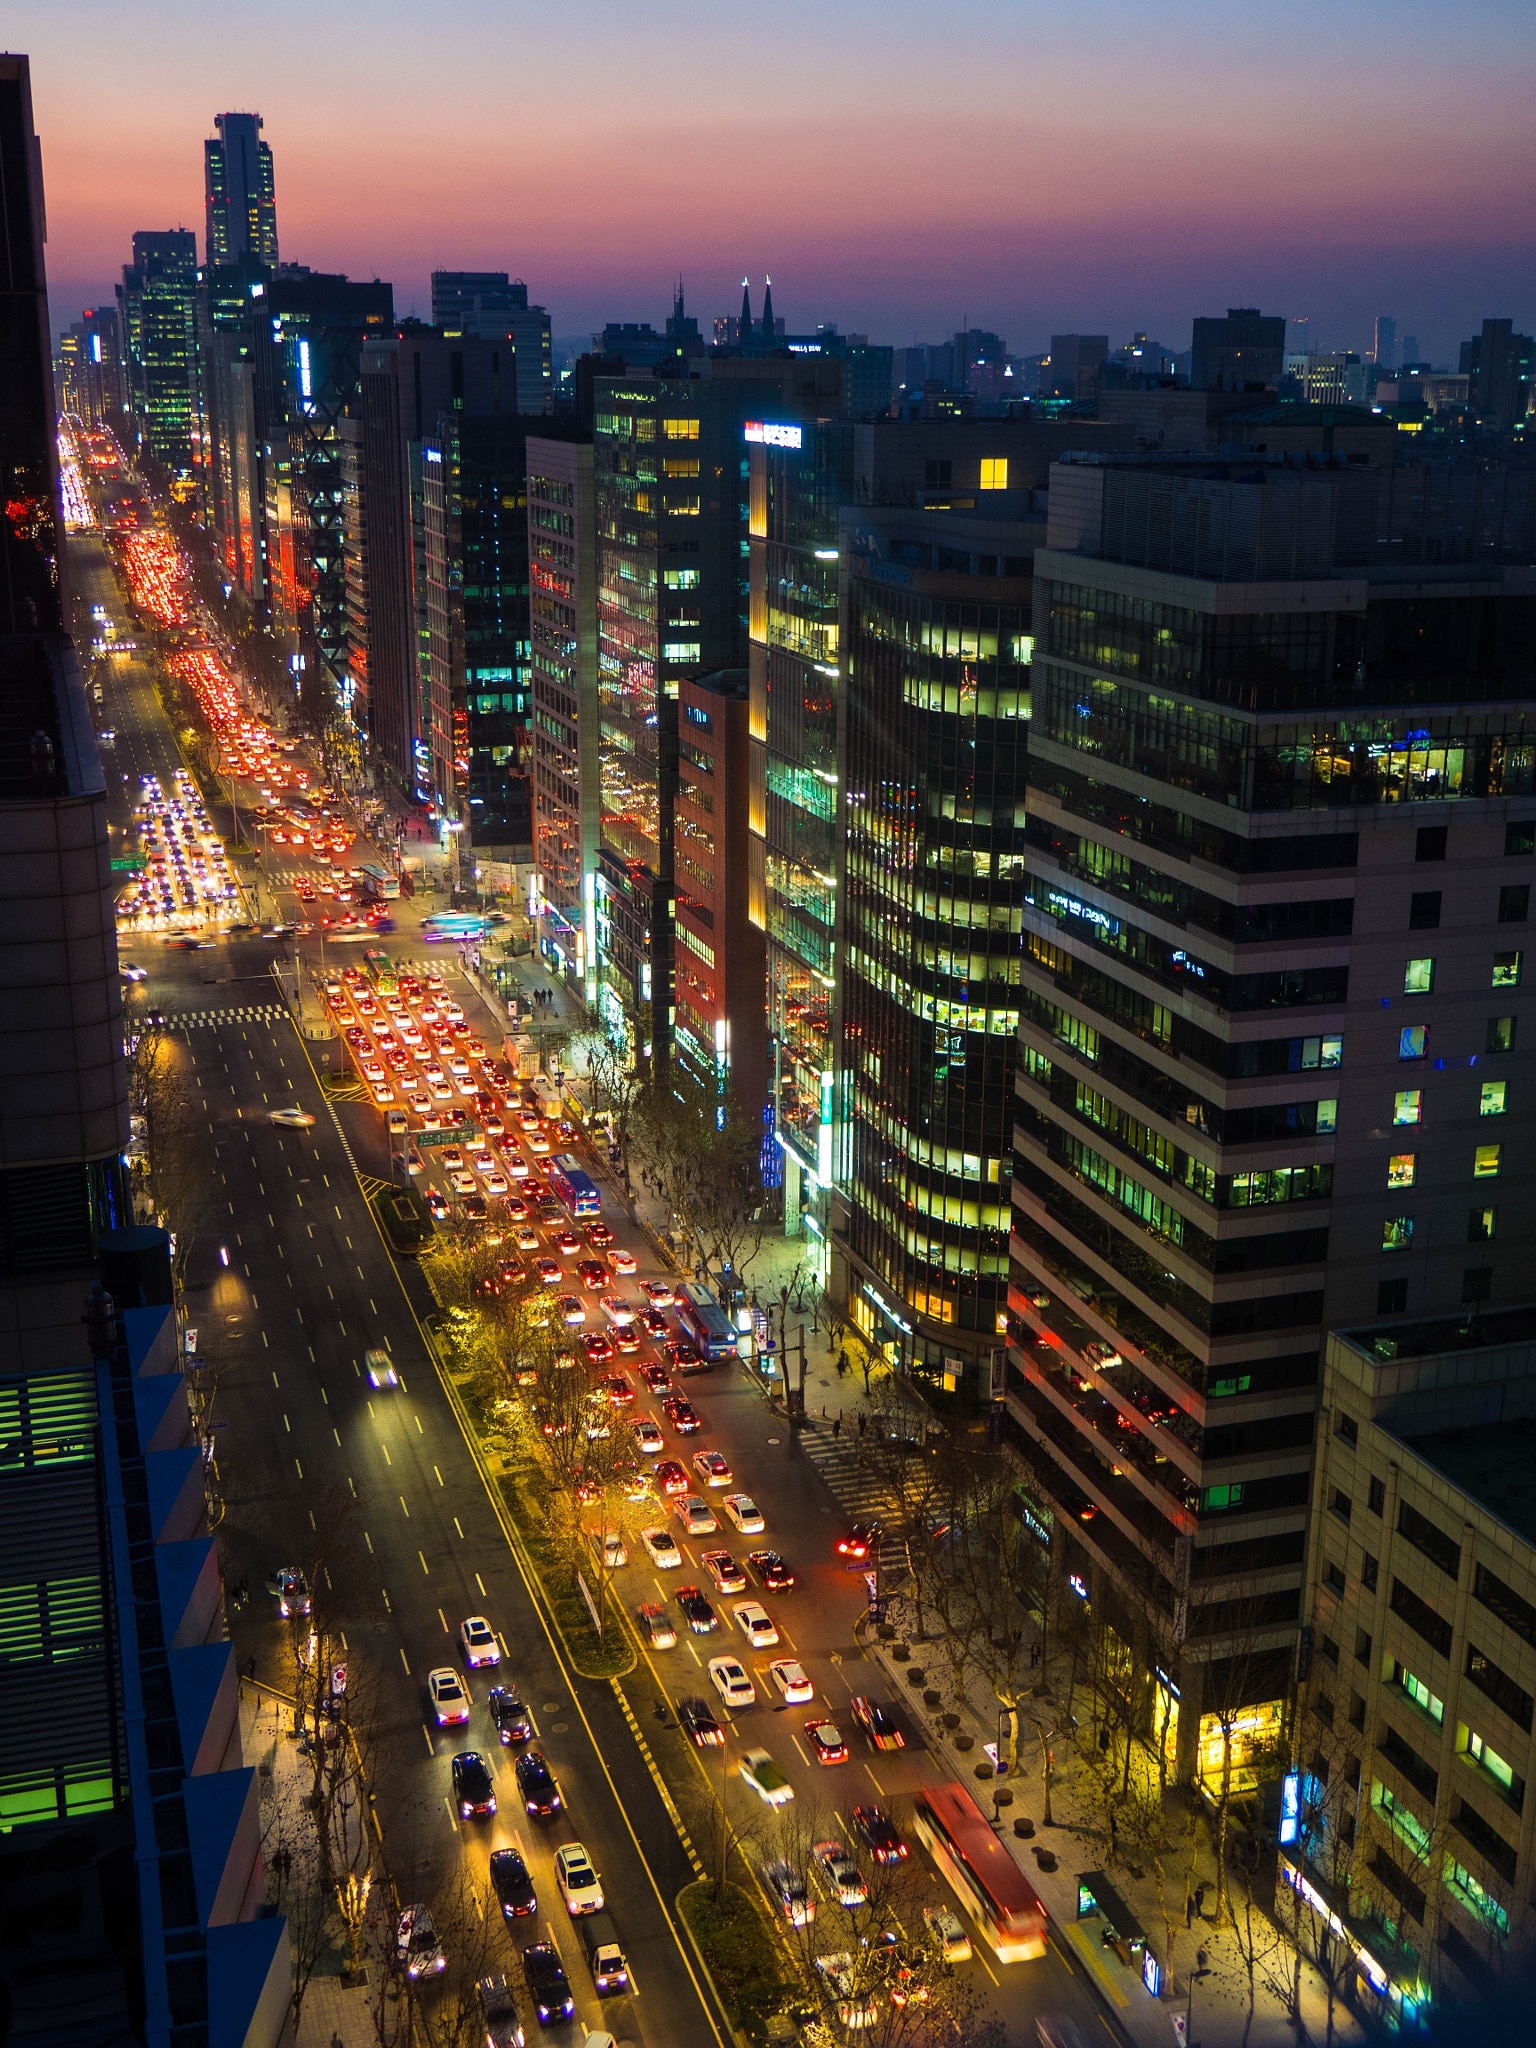 500px provided description: a long march to their homes... [#city ,#sunset ,#buildings ,#evening ,#skyline ,#seoul]